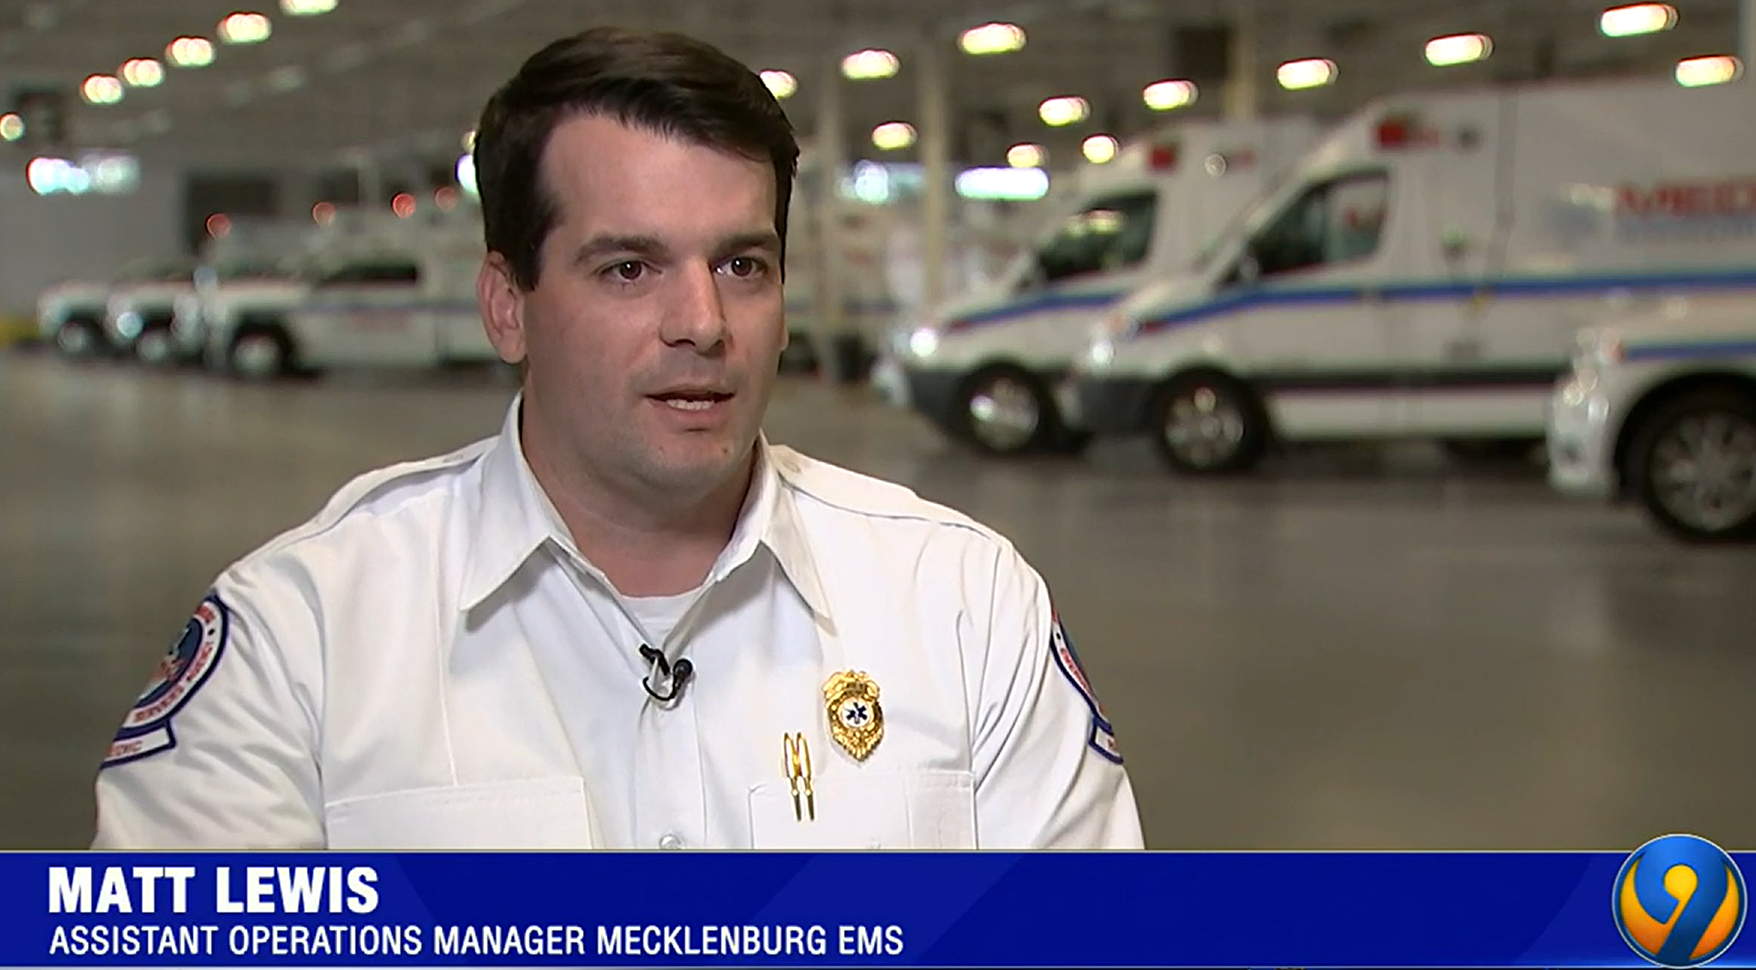 More 911 callers are getting ride-shares after launch of MEDIC initiative